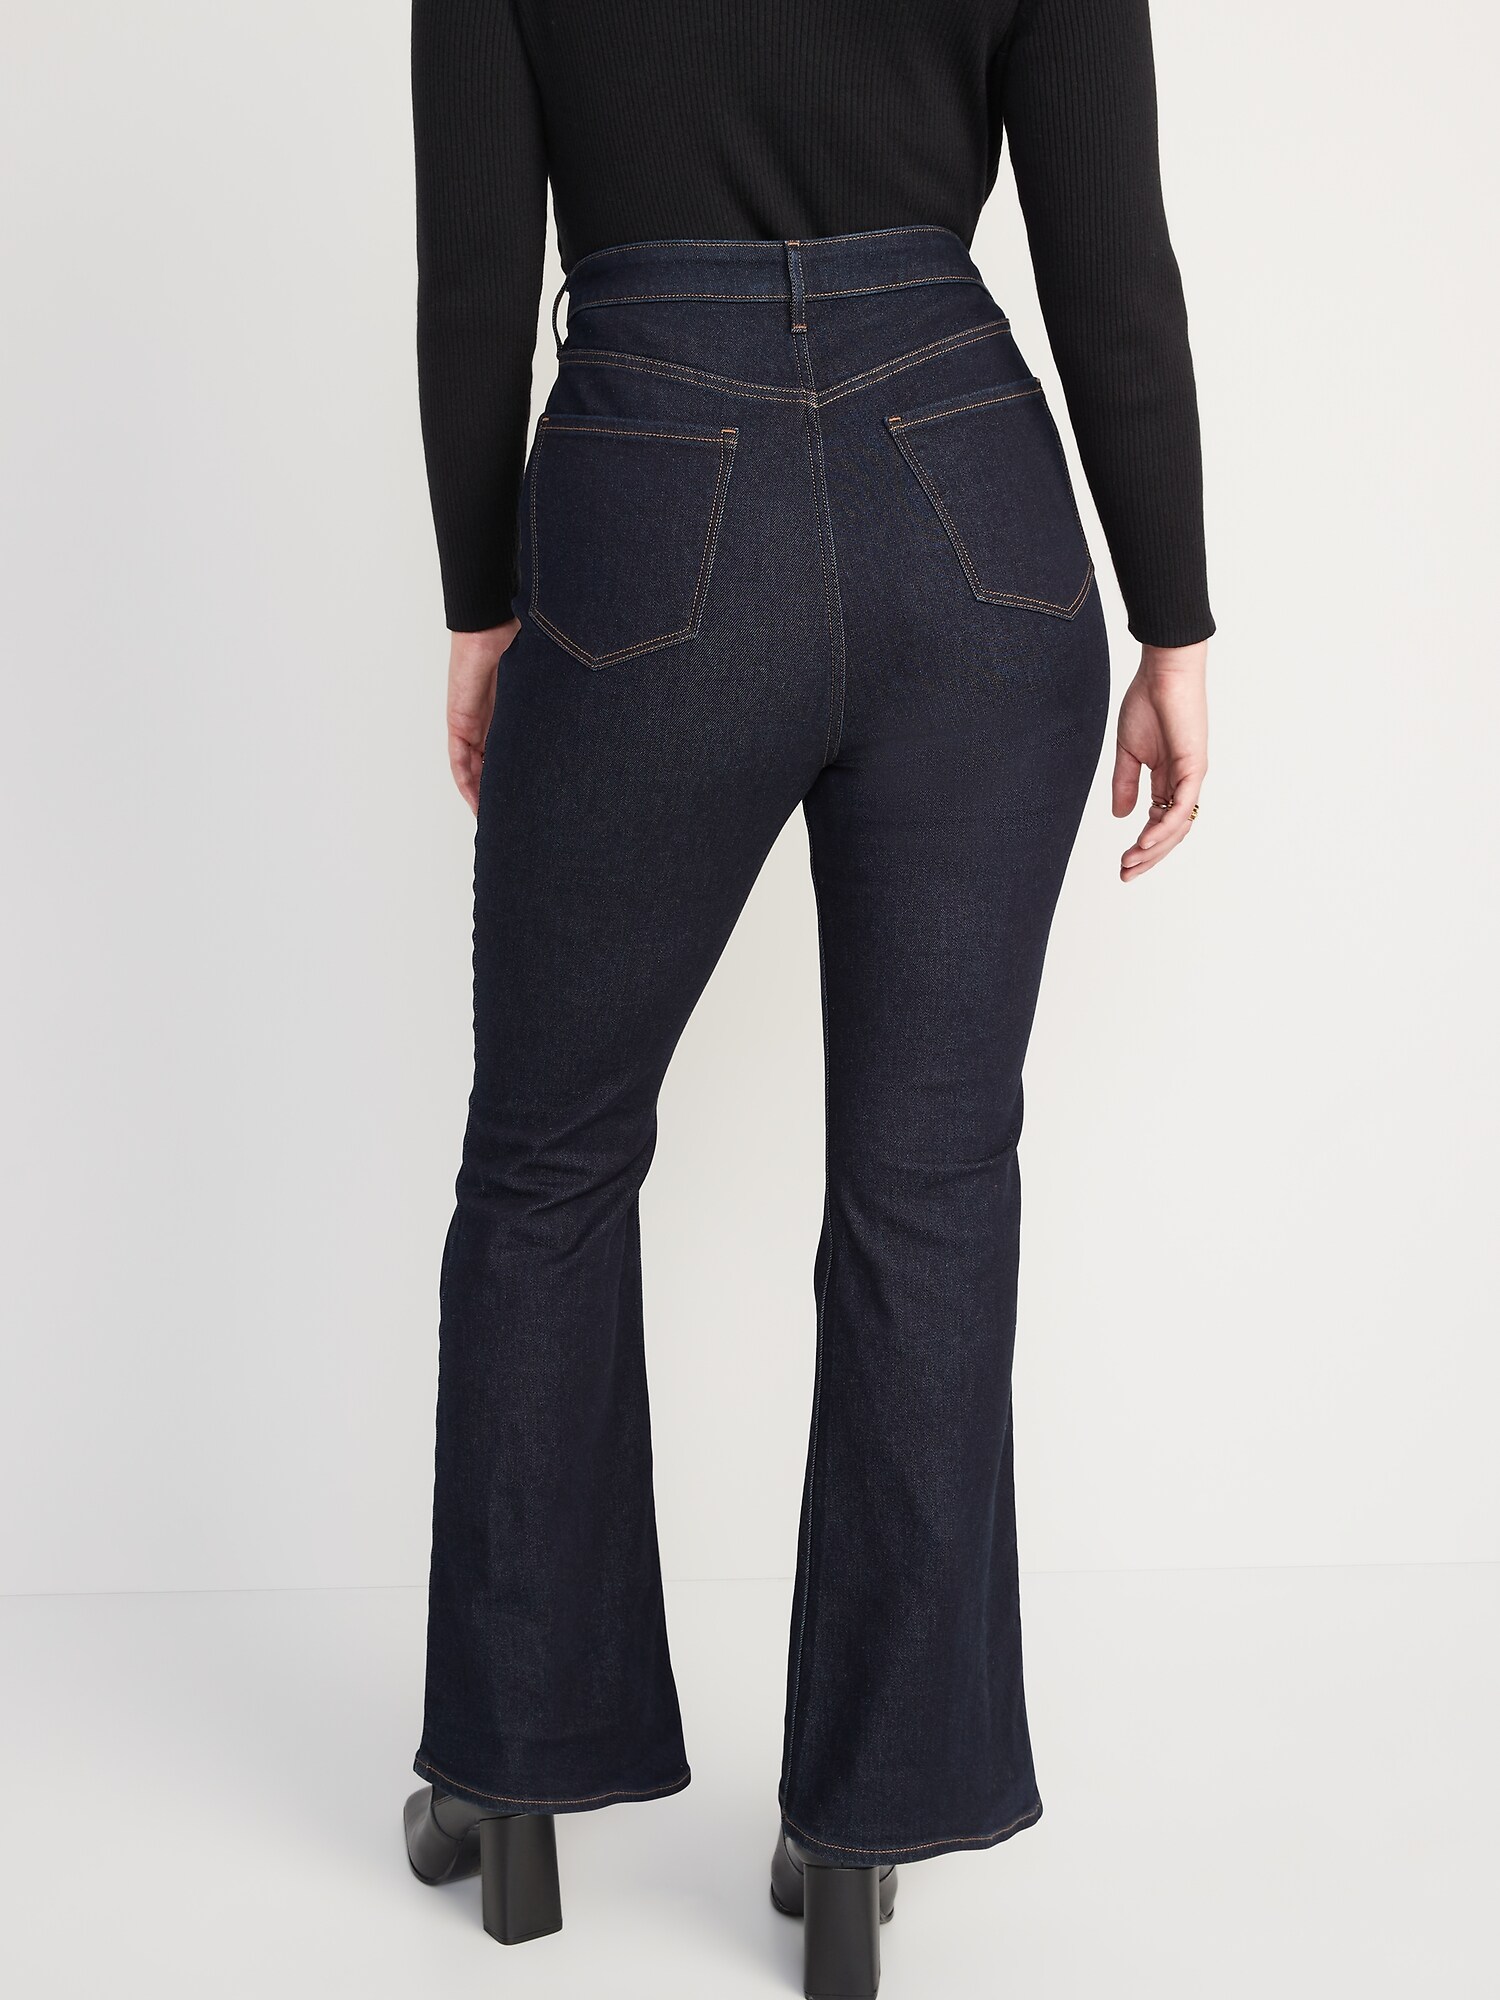 Topshop Curve Joni flare jeans in washed black